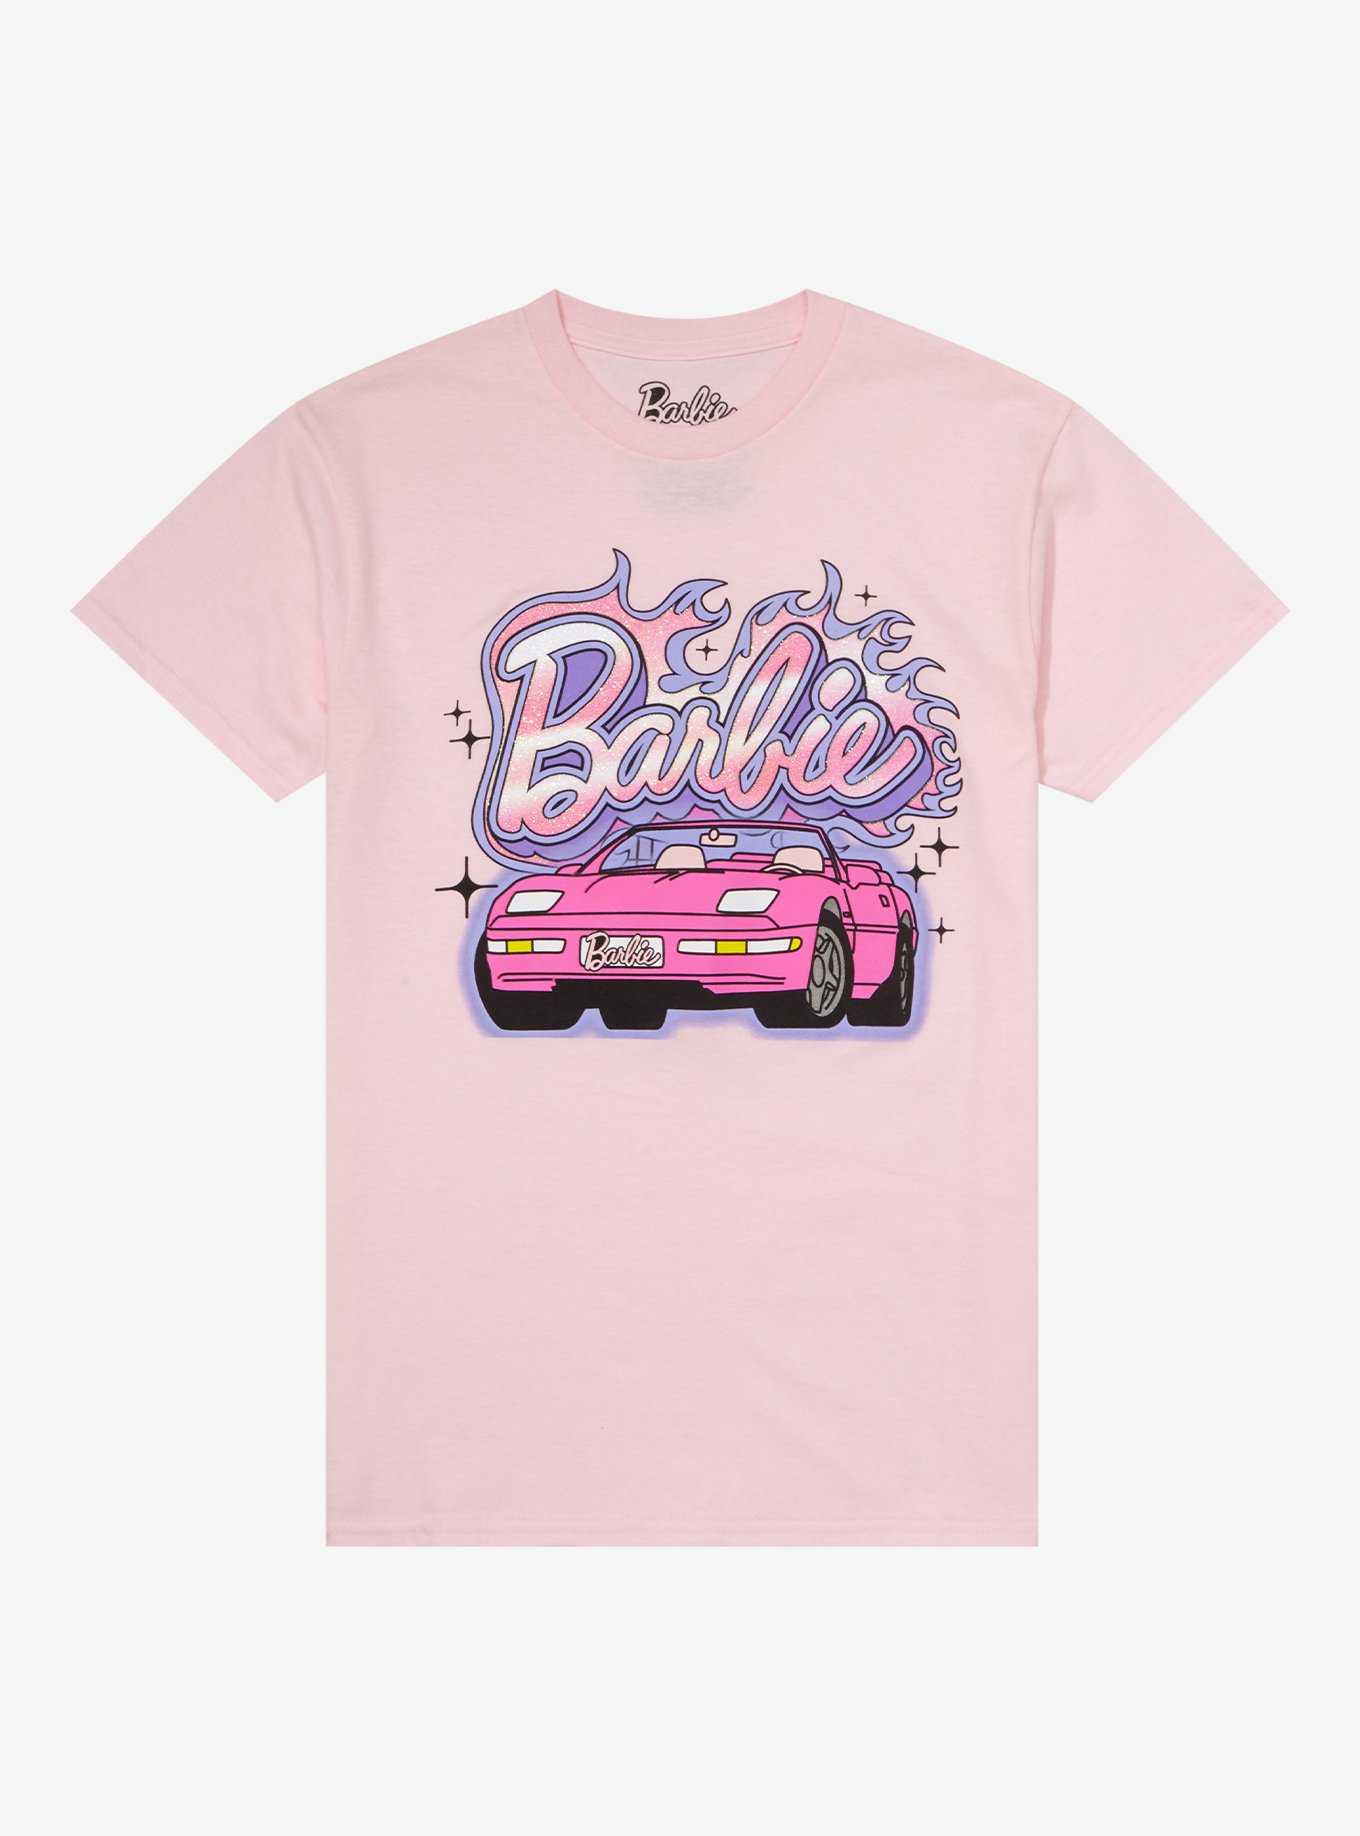 OFFICIAL Barbie Shirts & Merch | Hot Topic